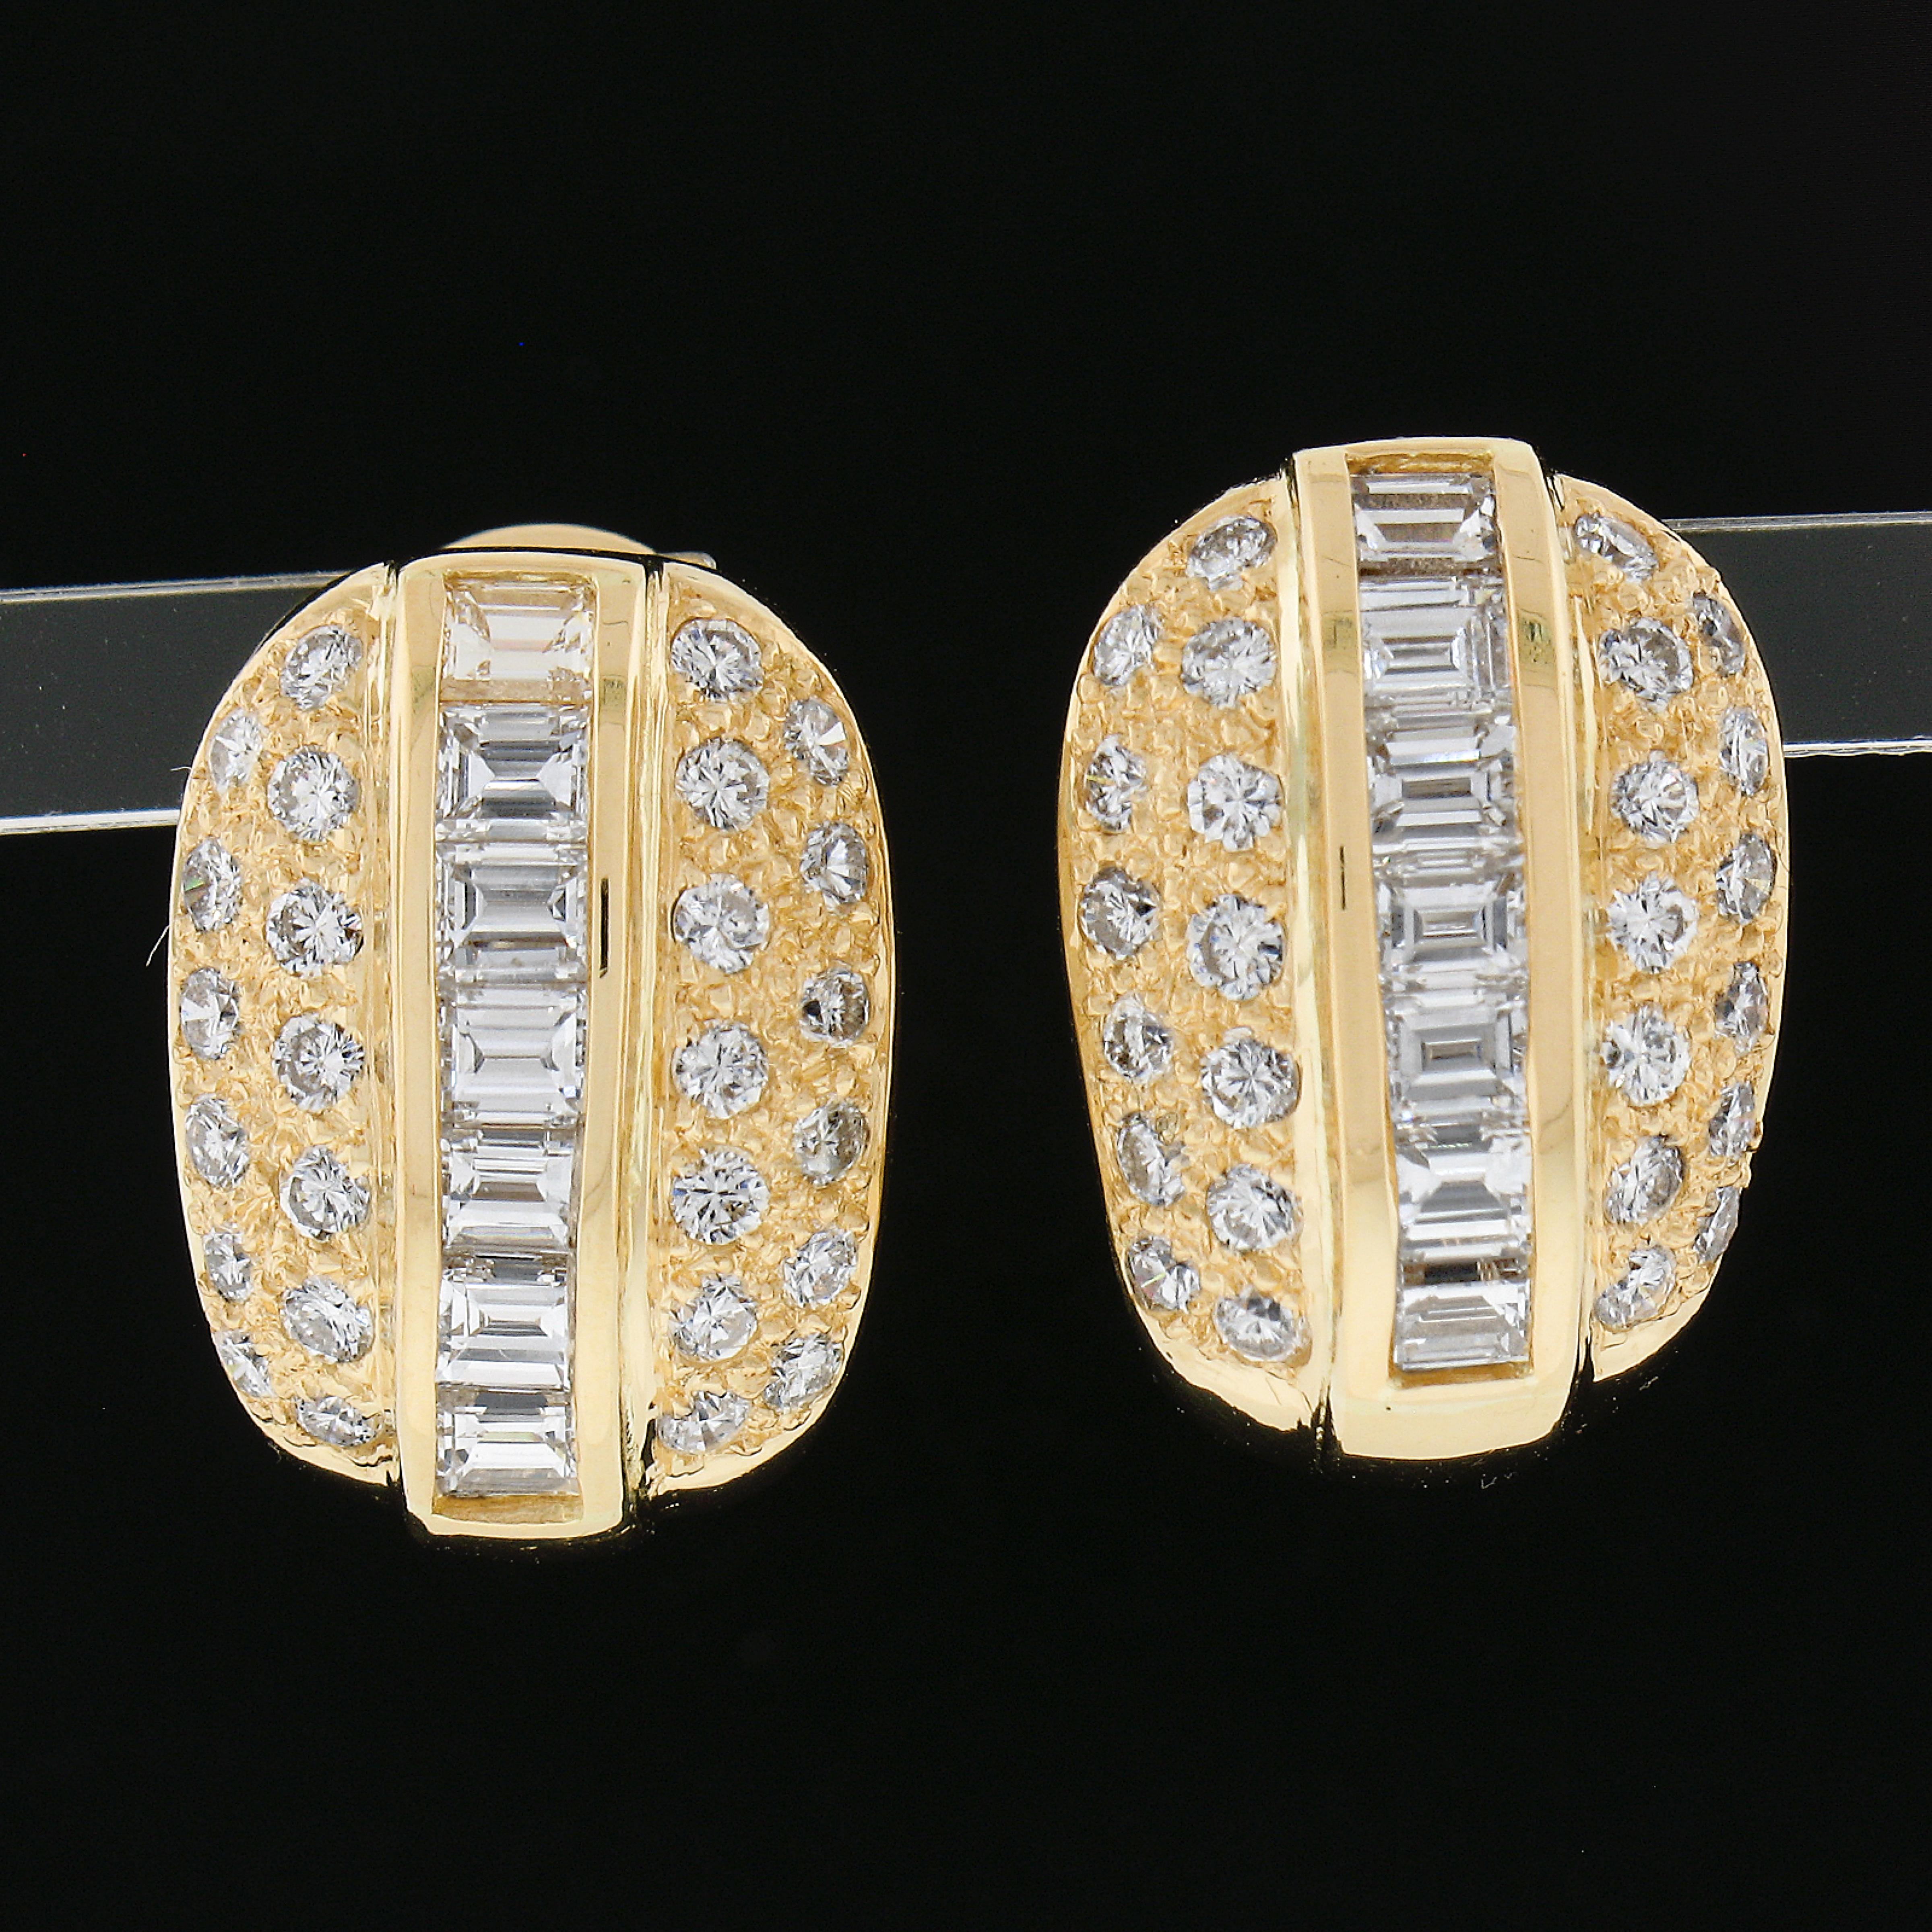 You are looking at a beautiful pair of earrings crafted in solid 18k yellow gold. These earrings feature approximately 2.3ctw of diamonds. The center row are rectangular step cut diamonds in a channel settings and accented with round brilliant cut